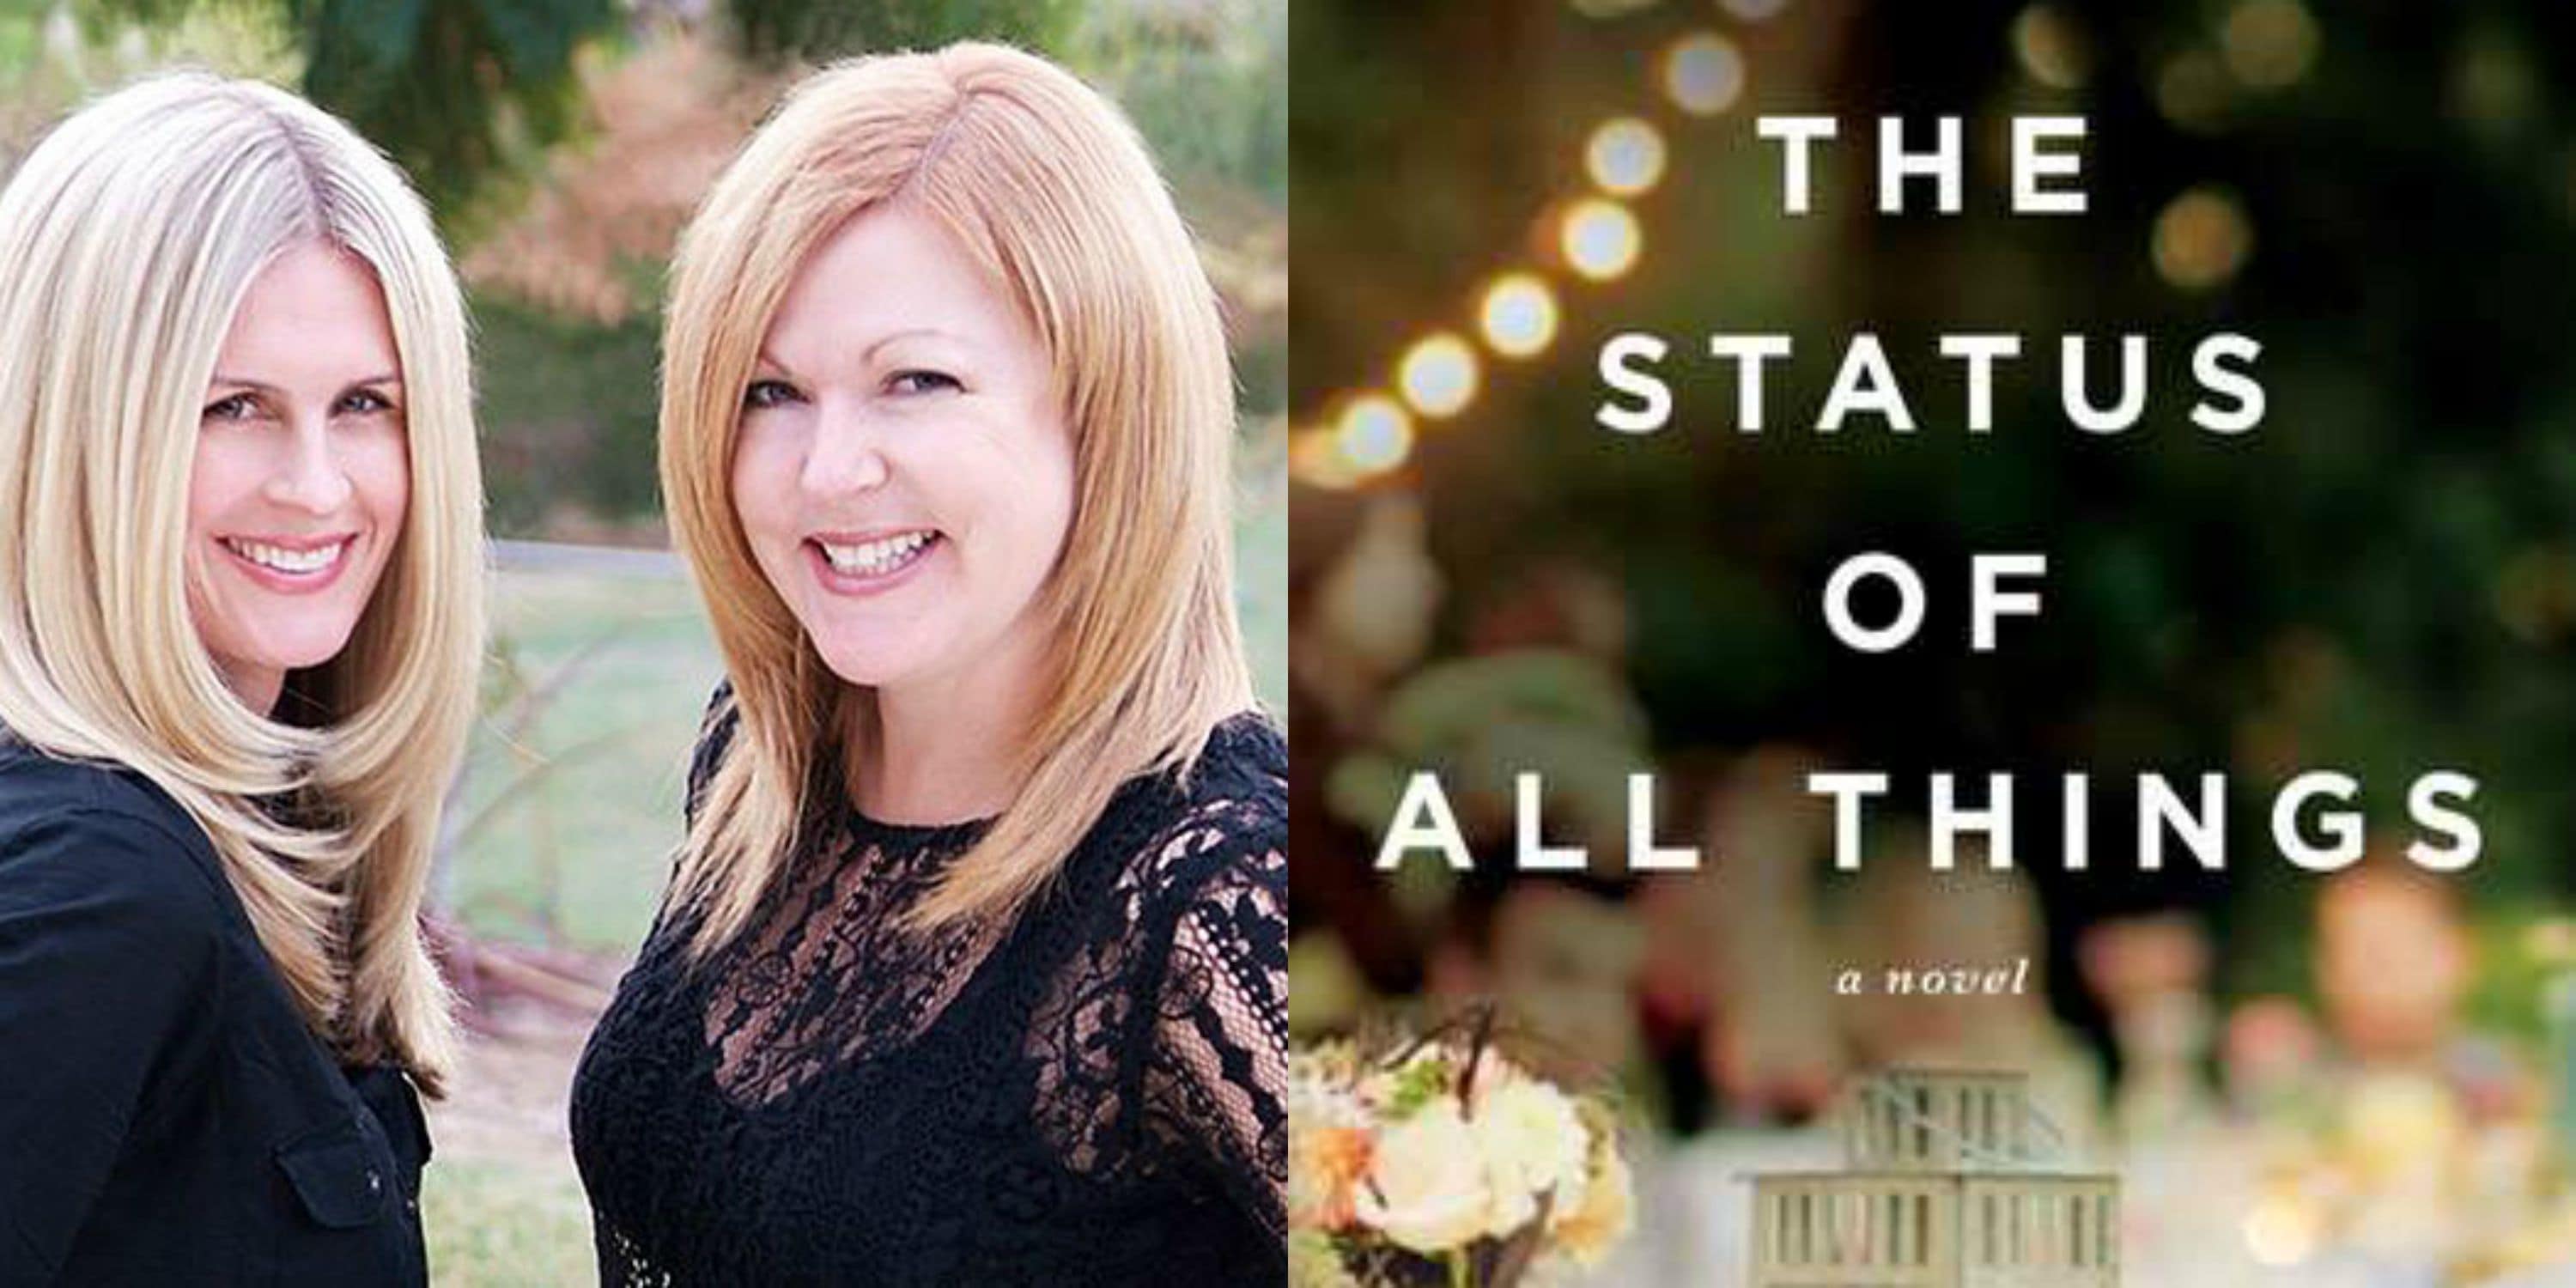 Sundays With Writers: The Status of All Things by Liz Fenton ...